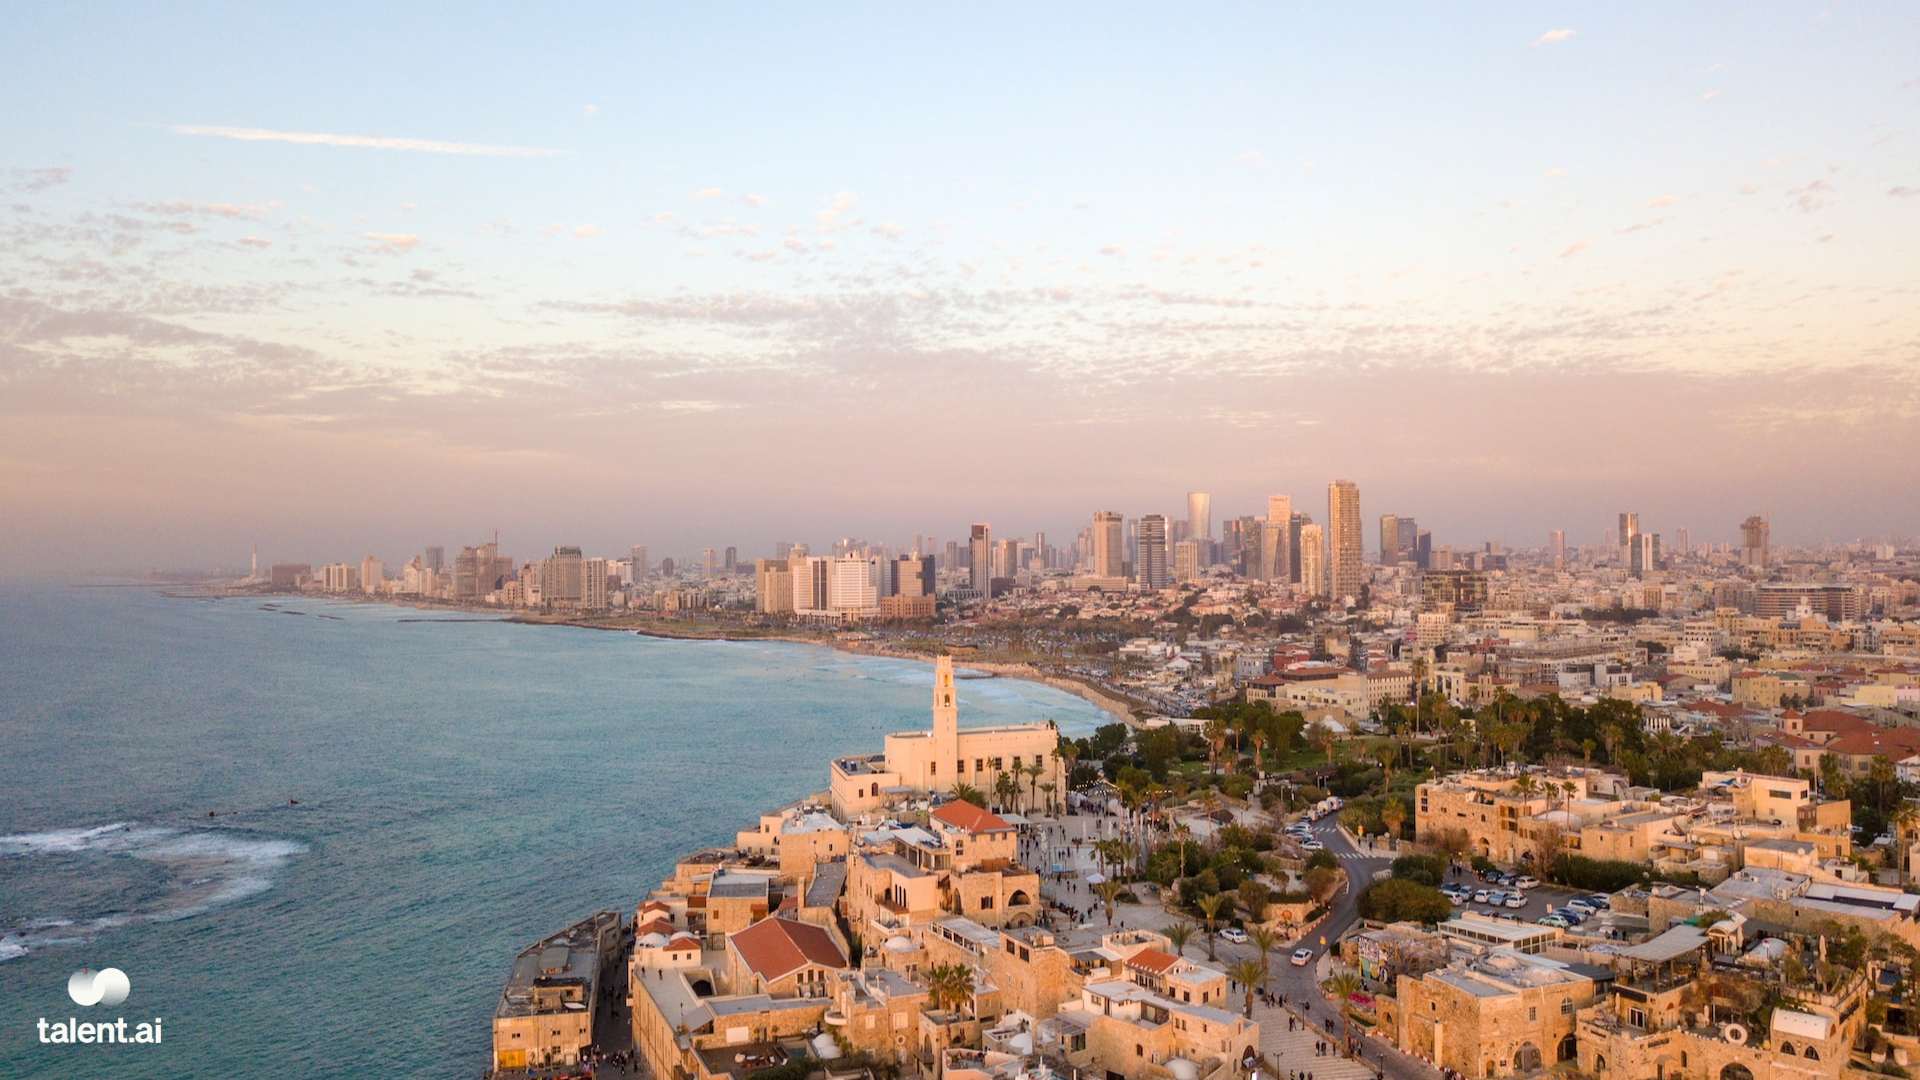 7 of the most exciting startups in Israel